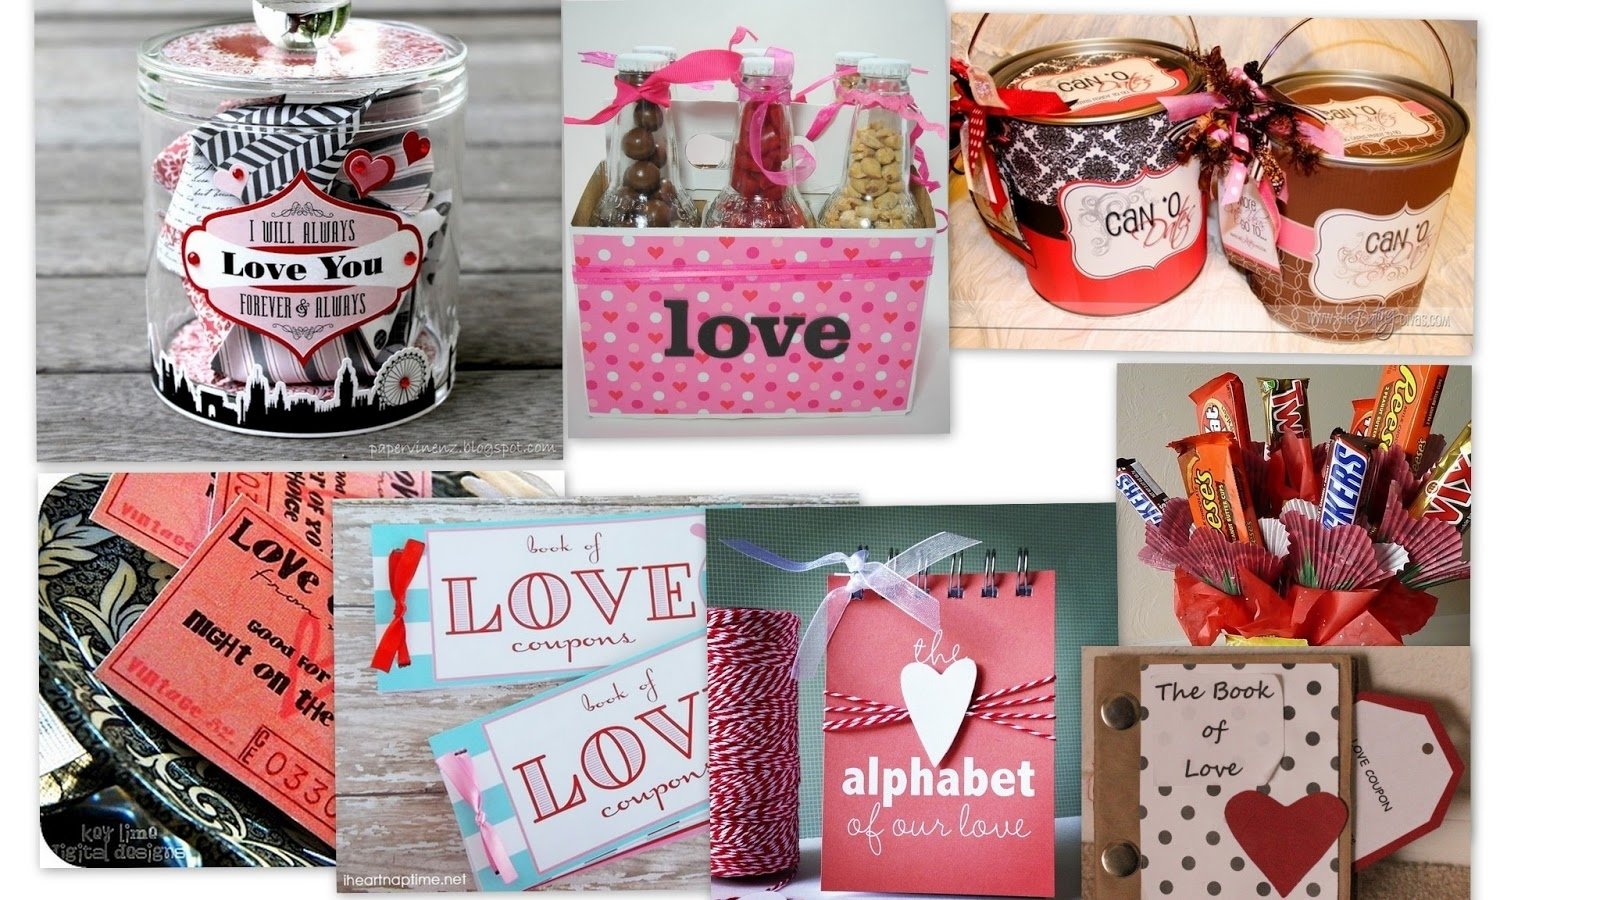 10 Lovable Homemade Valentines Ideas For Him homemade valentines day gift ideas startupcorner co 5 2023